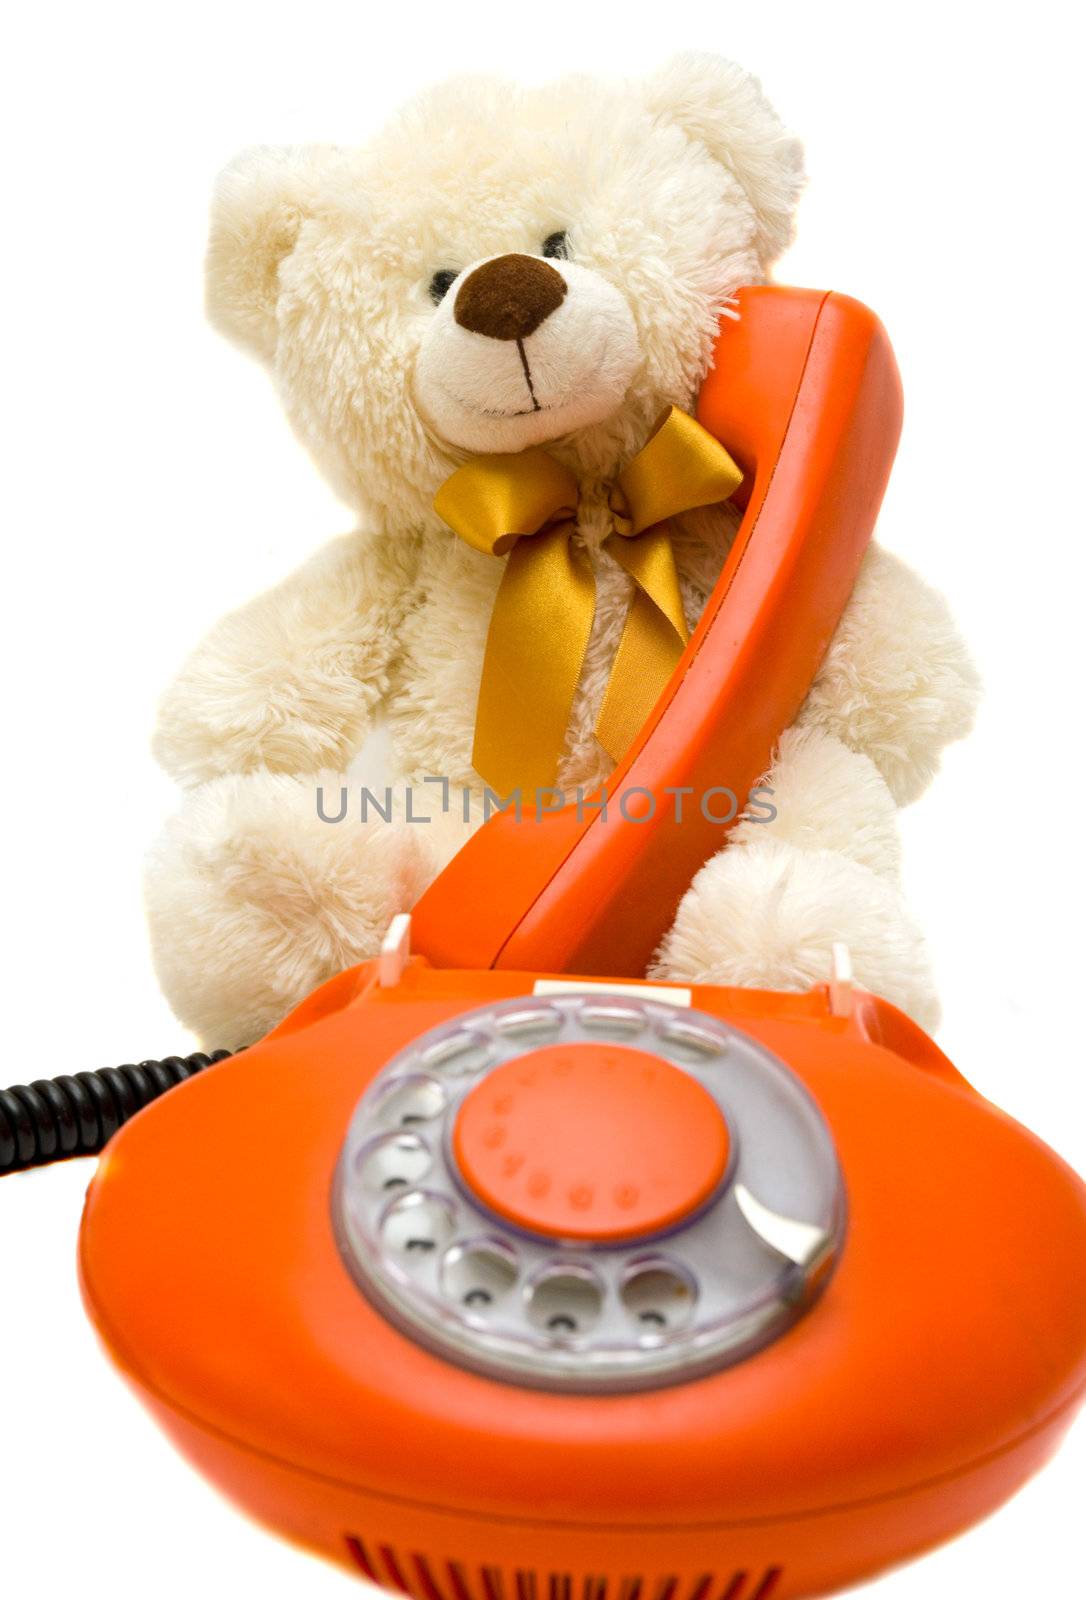 old red phone and bear toy teddy by semenovp